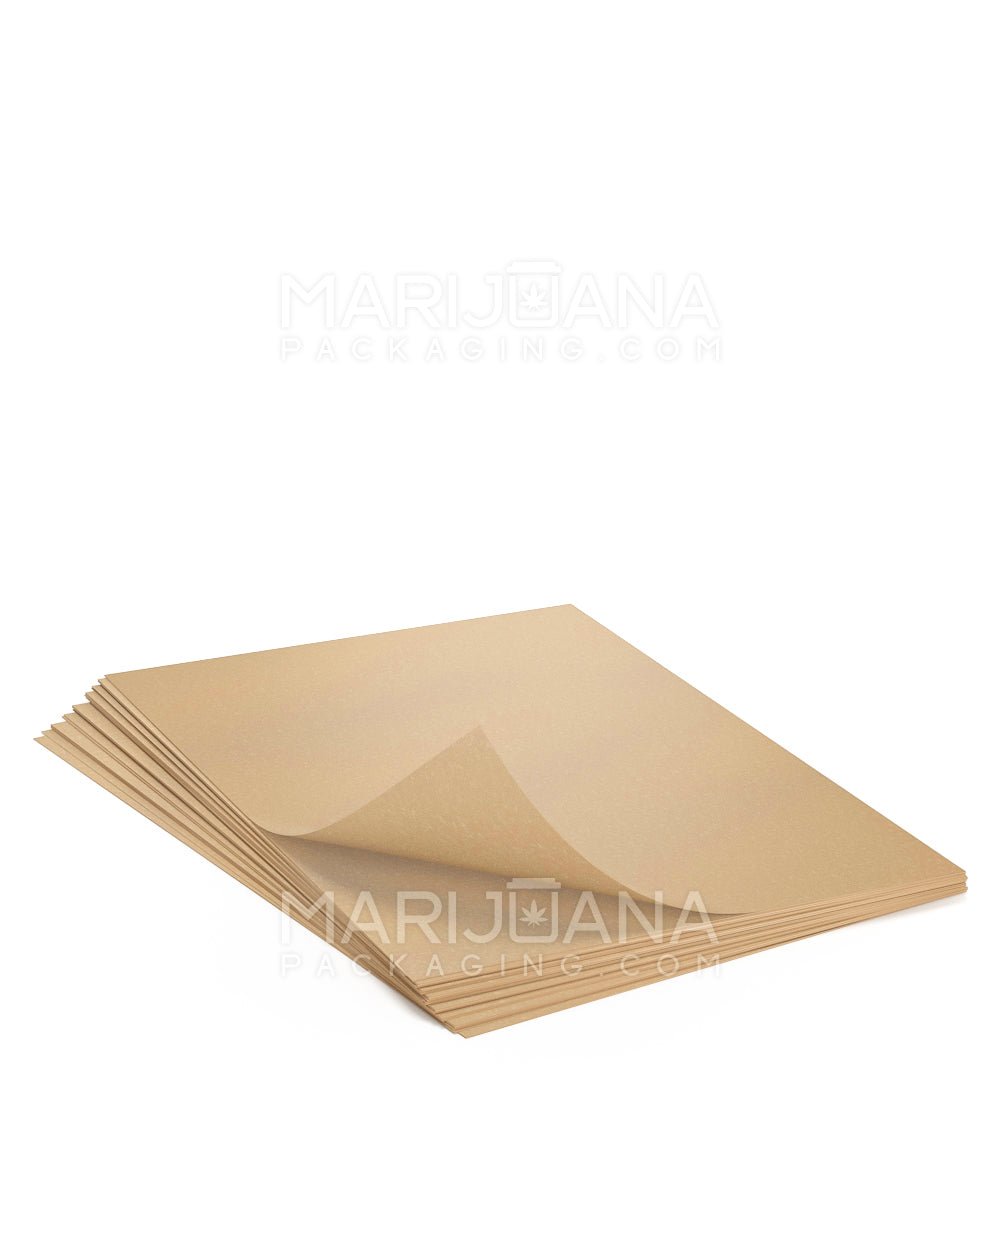 4 x 4 Parchment Paper Sheets - Silicone Coated - 1,000 Count